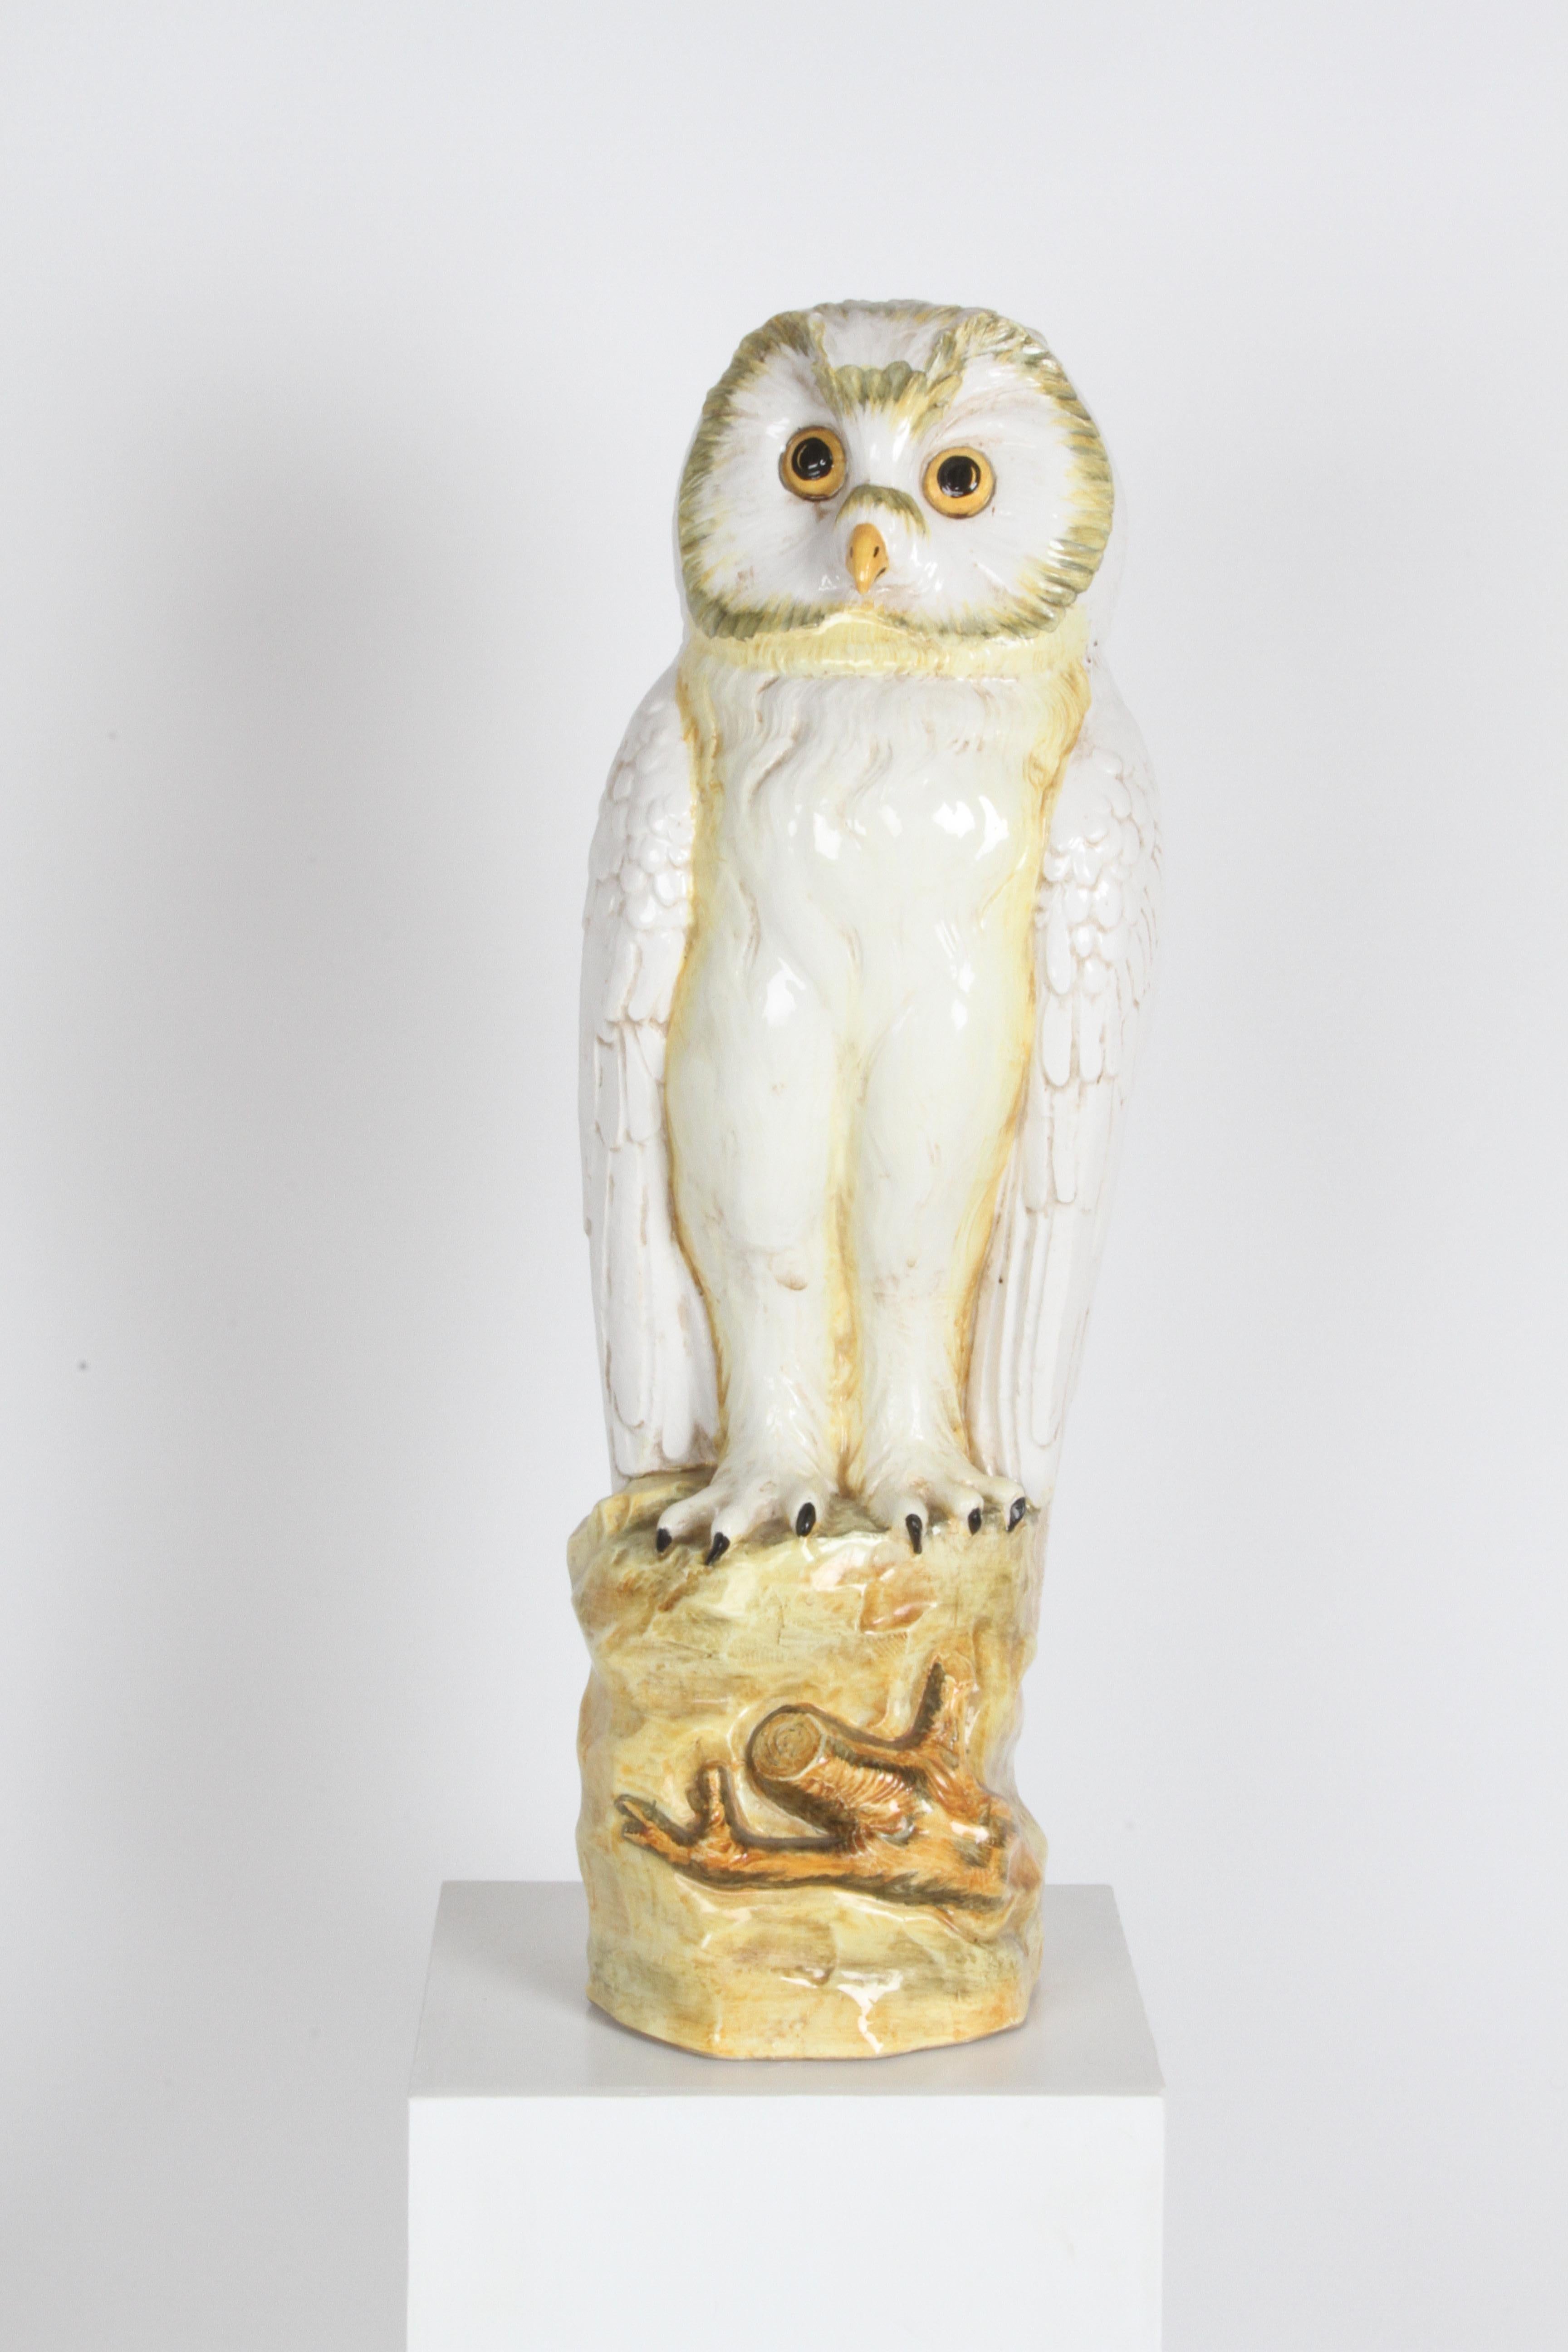 Large 1960s Italian Mid-Century majolica or maiolica glazed hand painted terracotta snow owl state or sculpture. Perched on a stump, colors include yellow , green , black and brown. No damage noted. Unmarked.  

